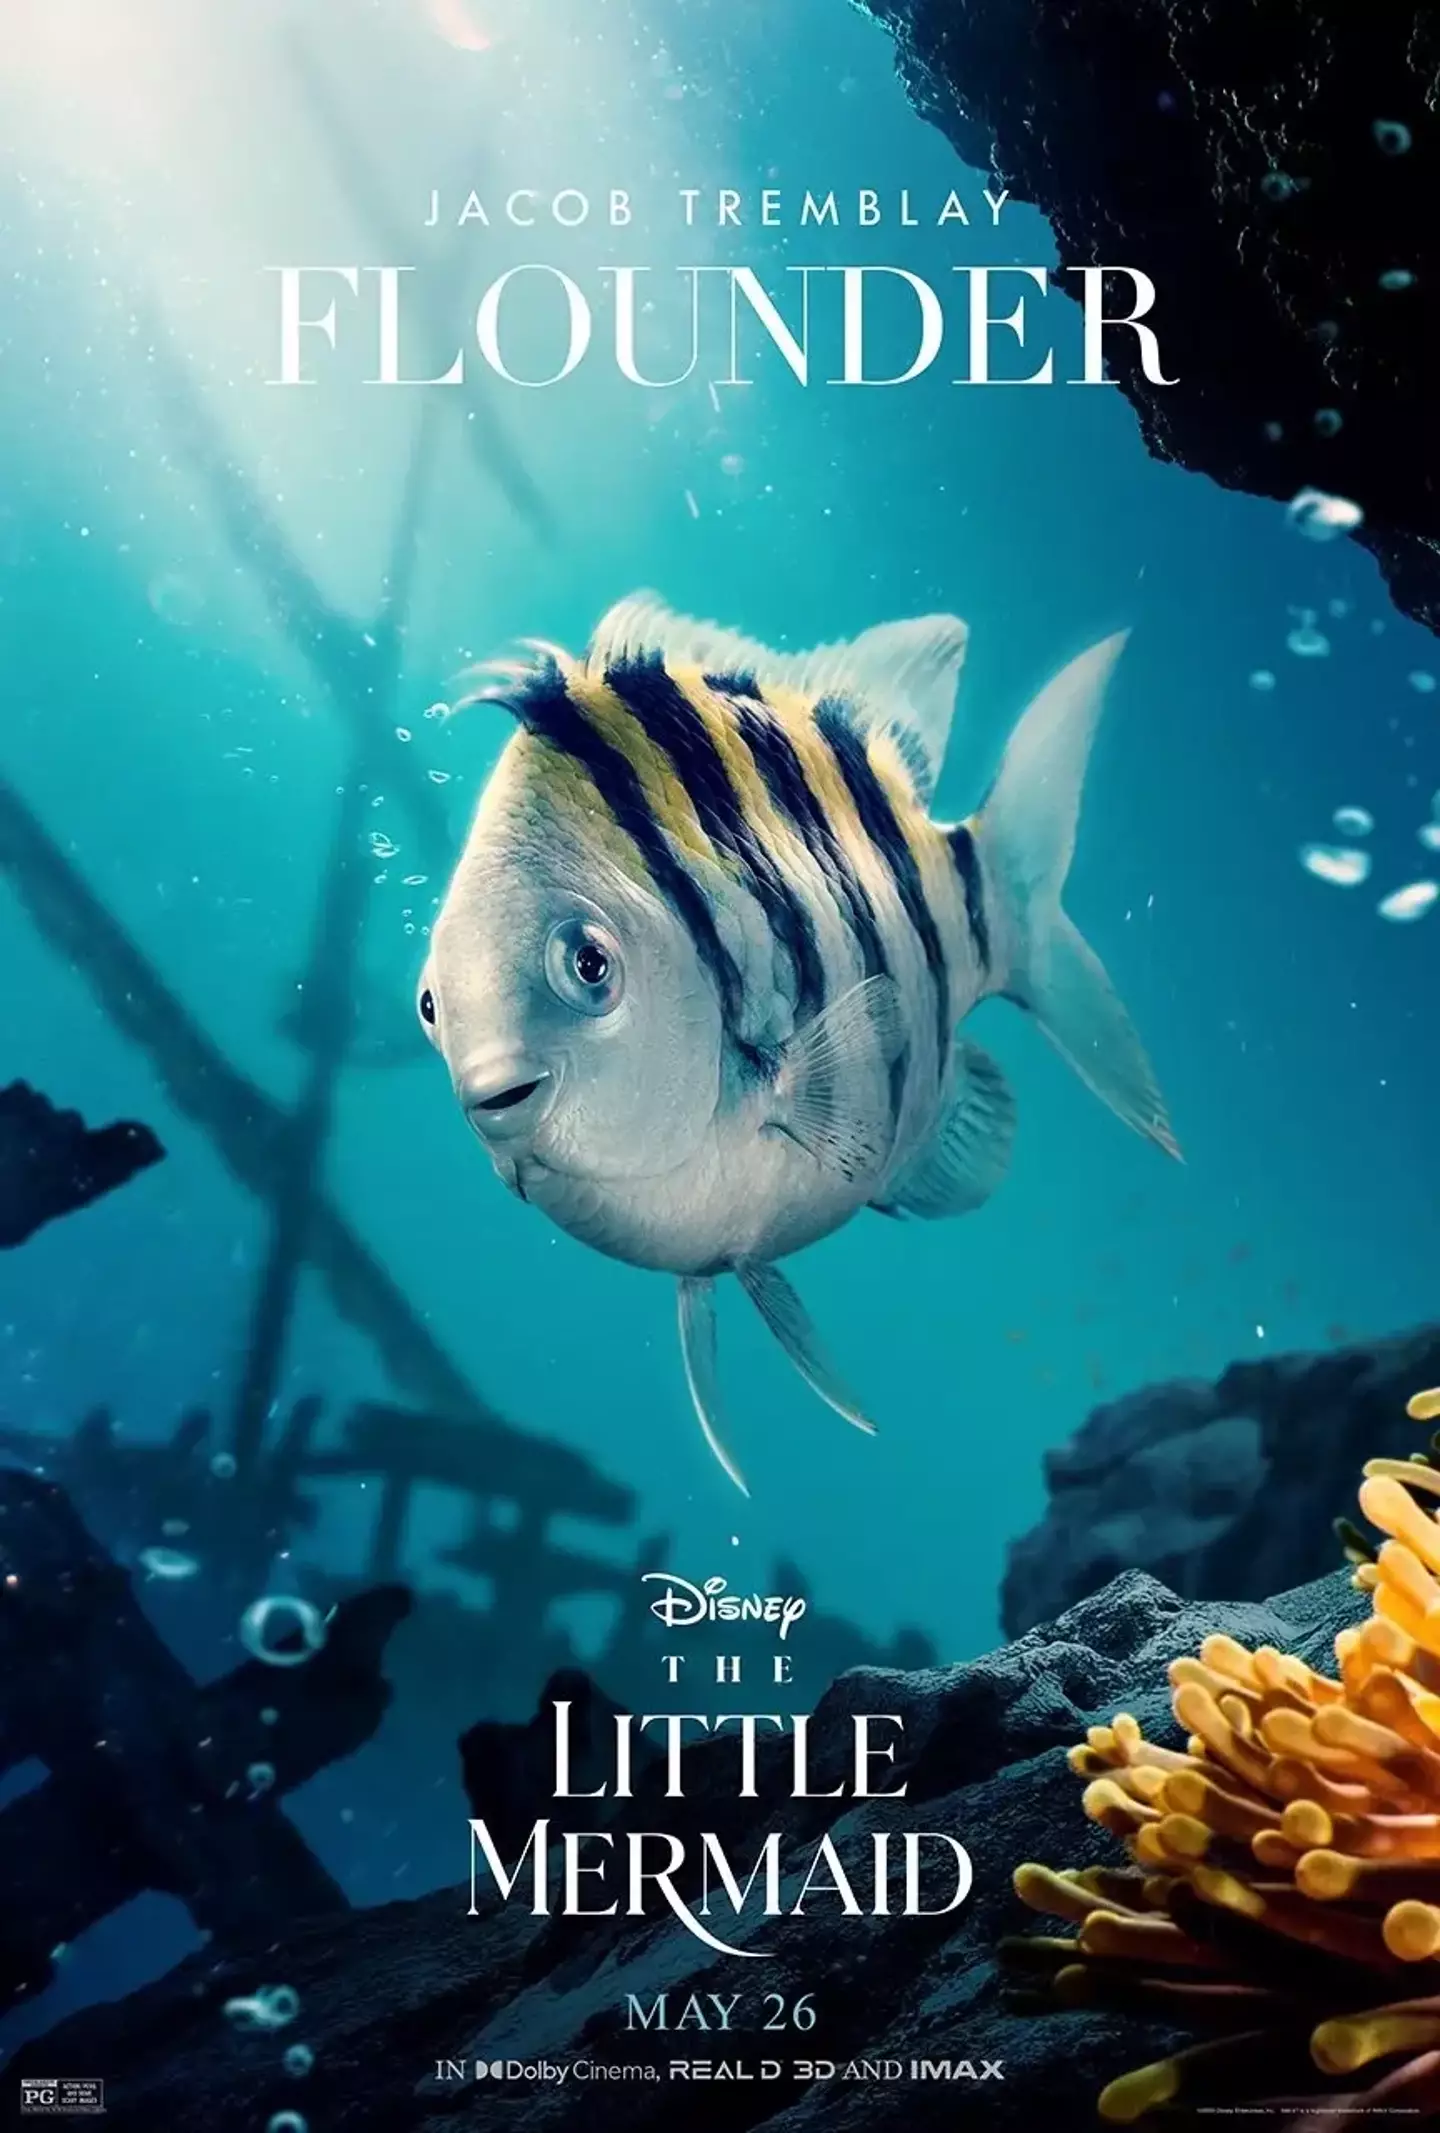 Flounder looks very different from the original film.